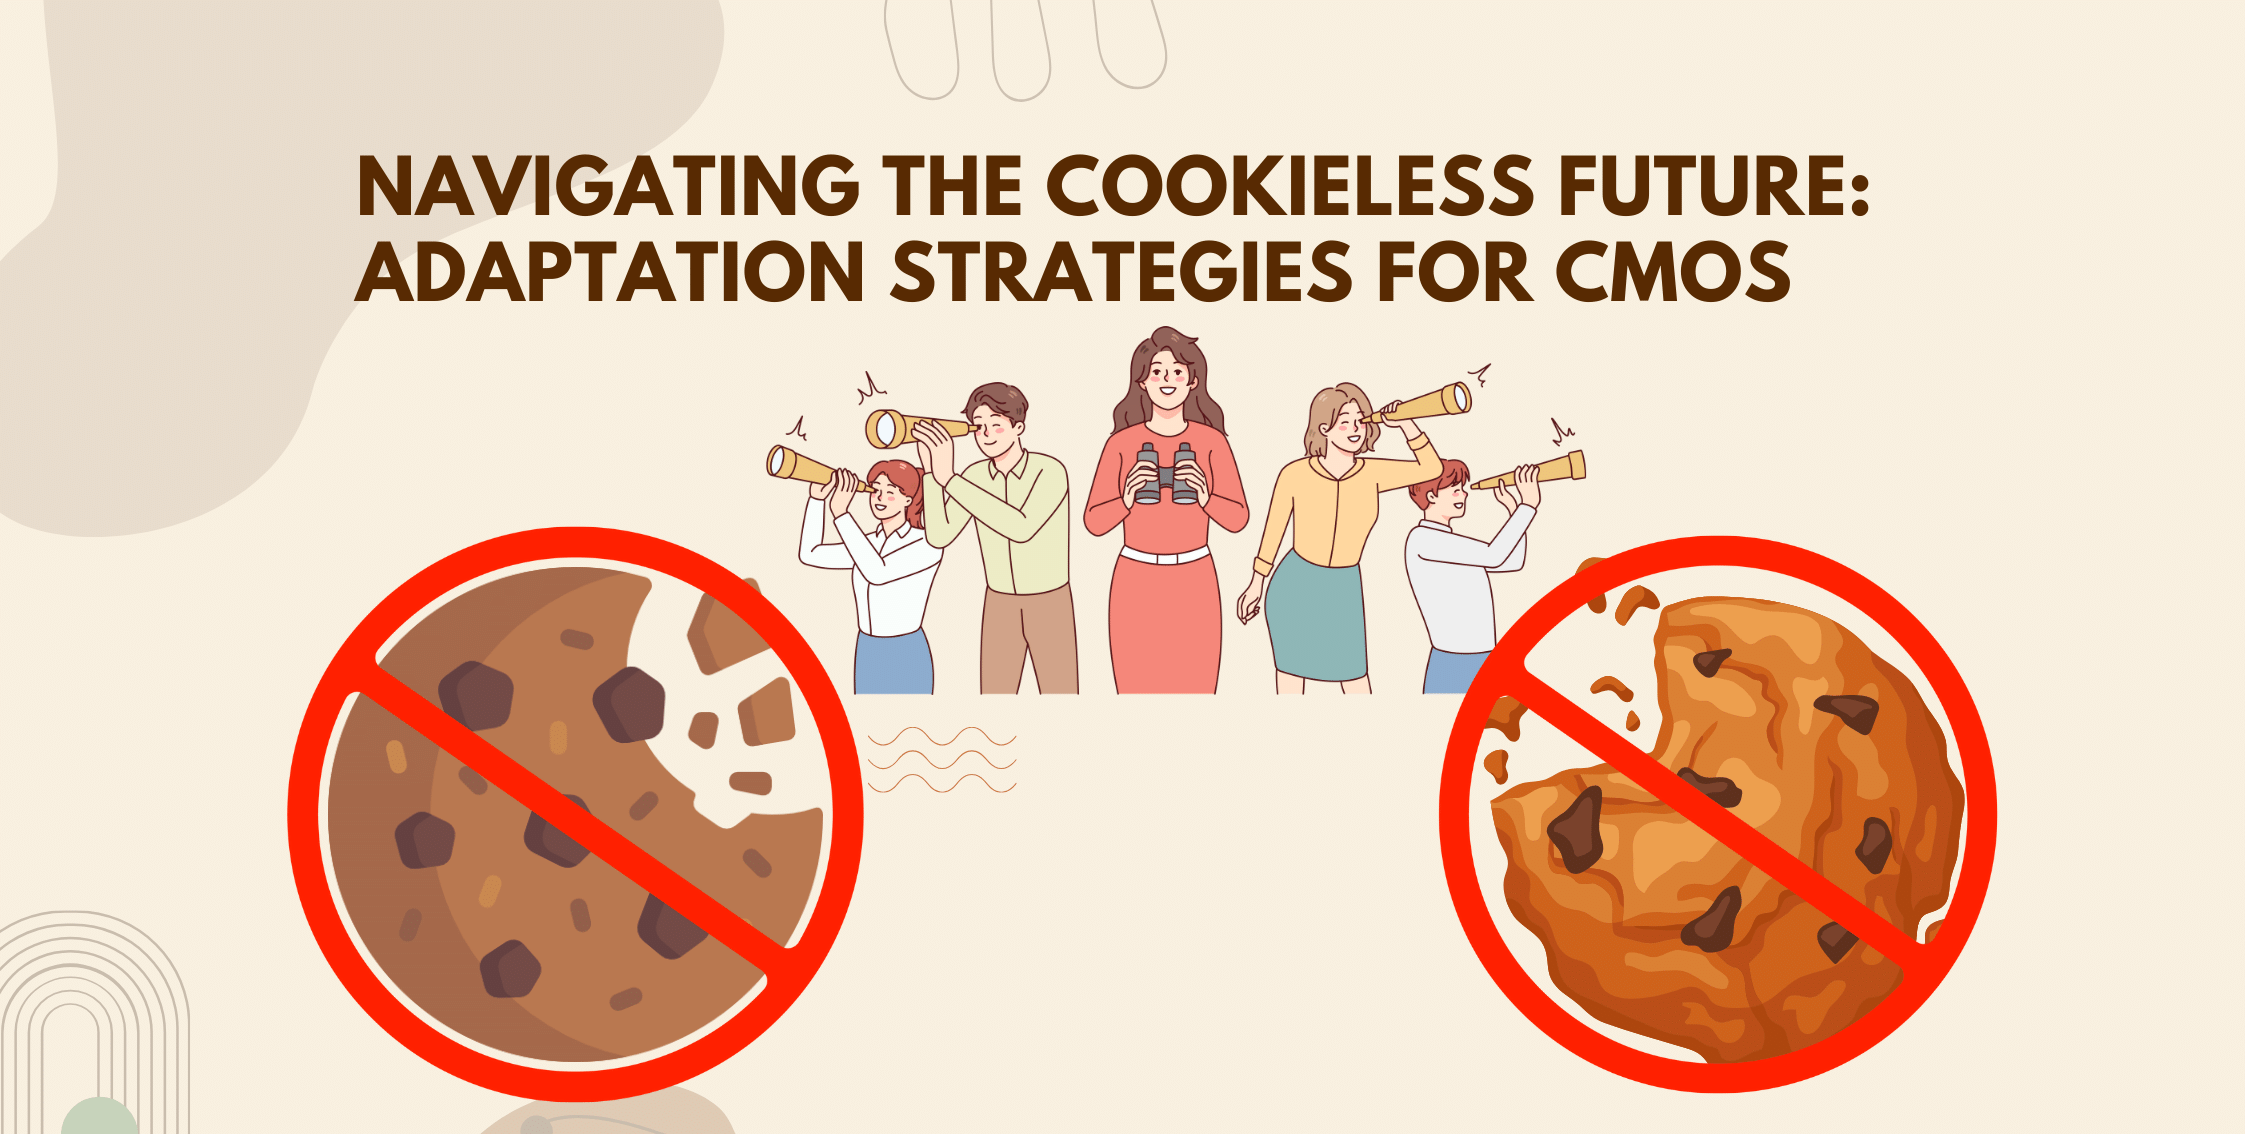 Navigating the Cookieless Future with Adaptable CMO Strategies